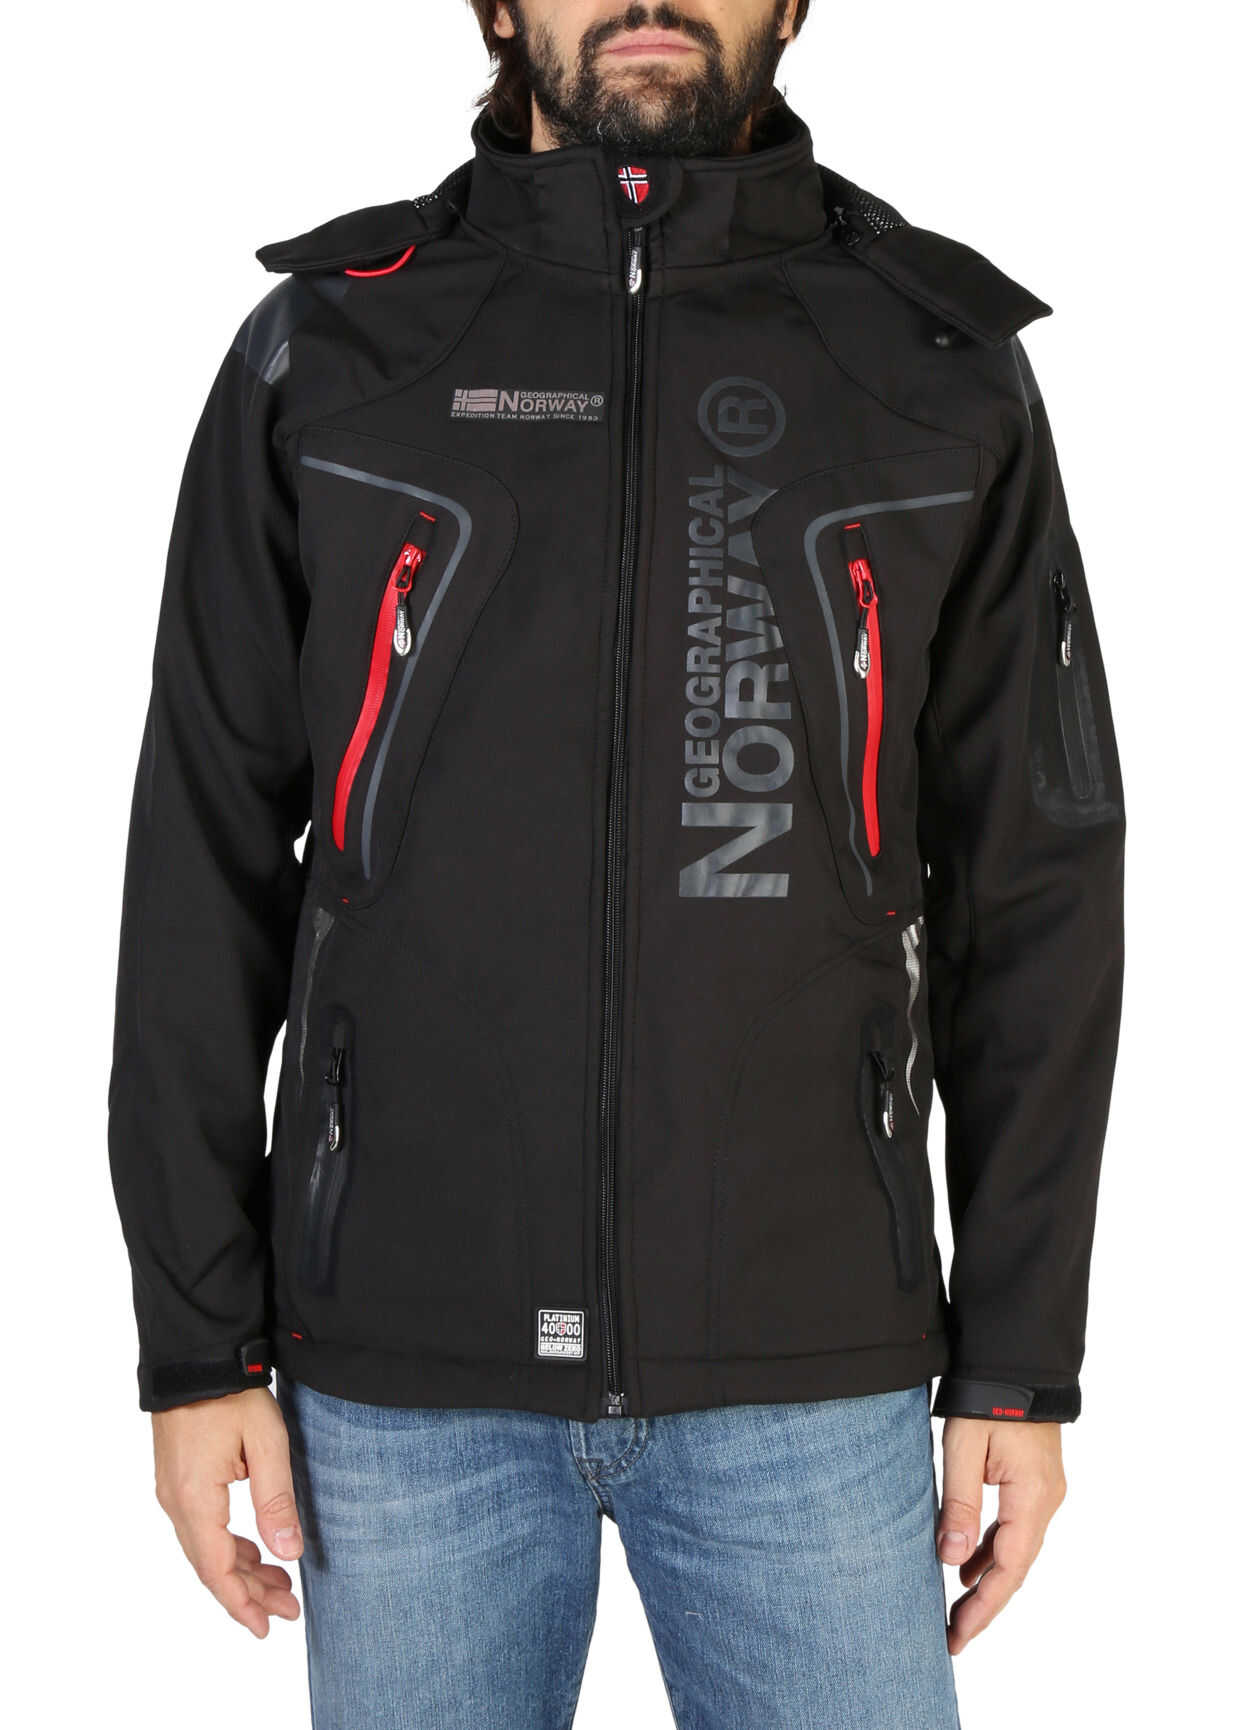 Geographical Norway Turbo_Man* BLACK